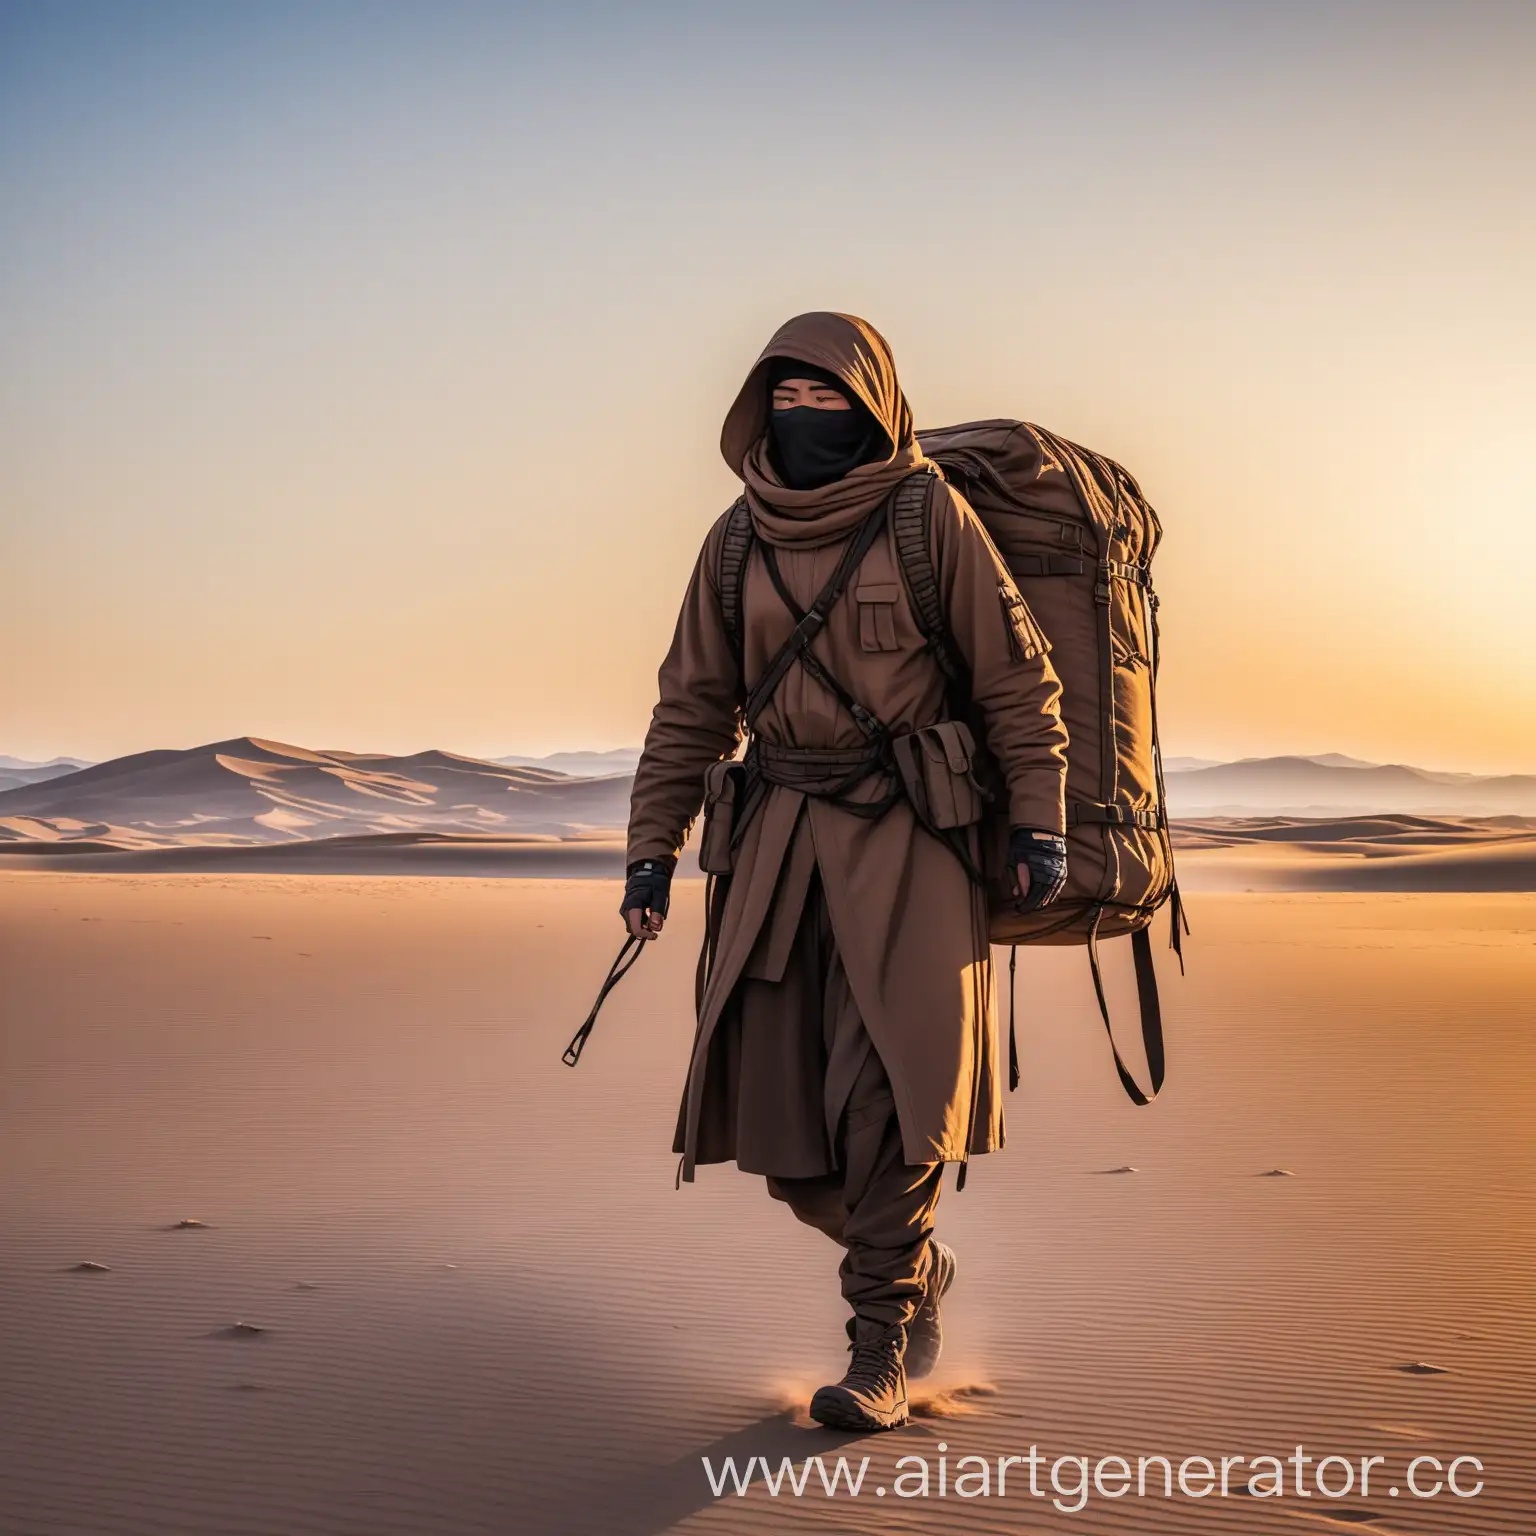 Nomad-Journeying-Across-Desert-Dunes-with-Camel-Companion